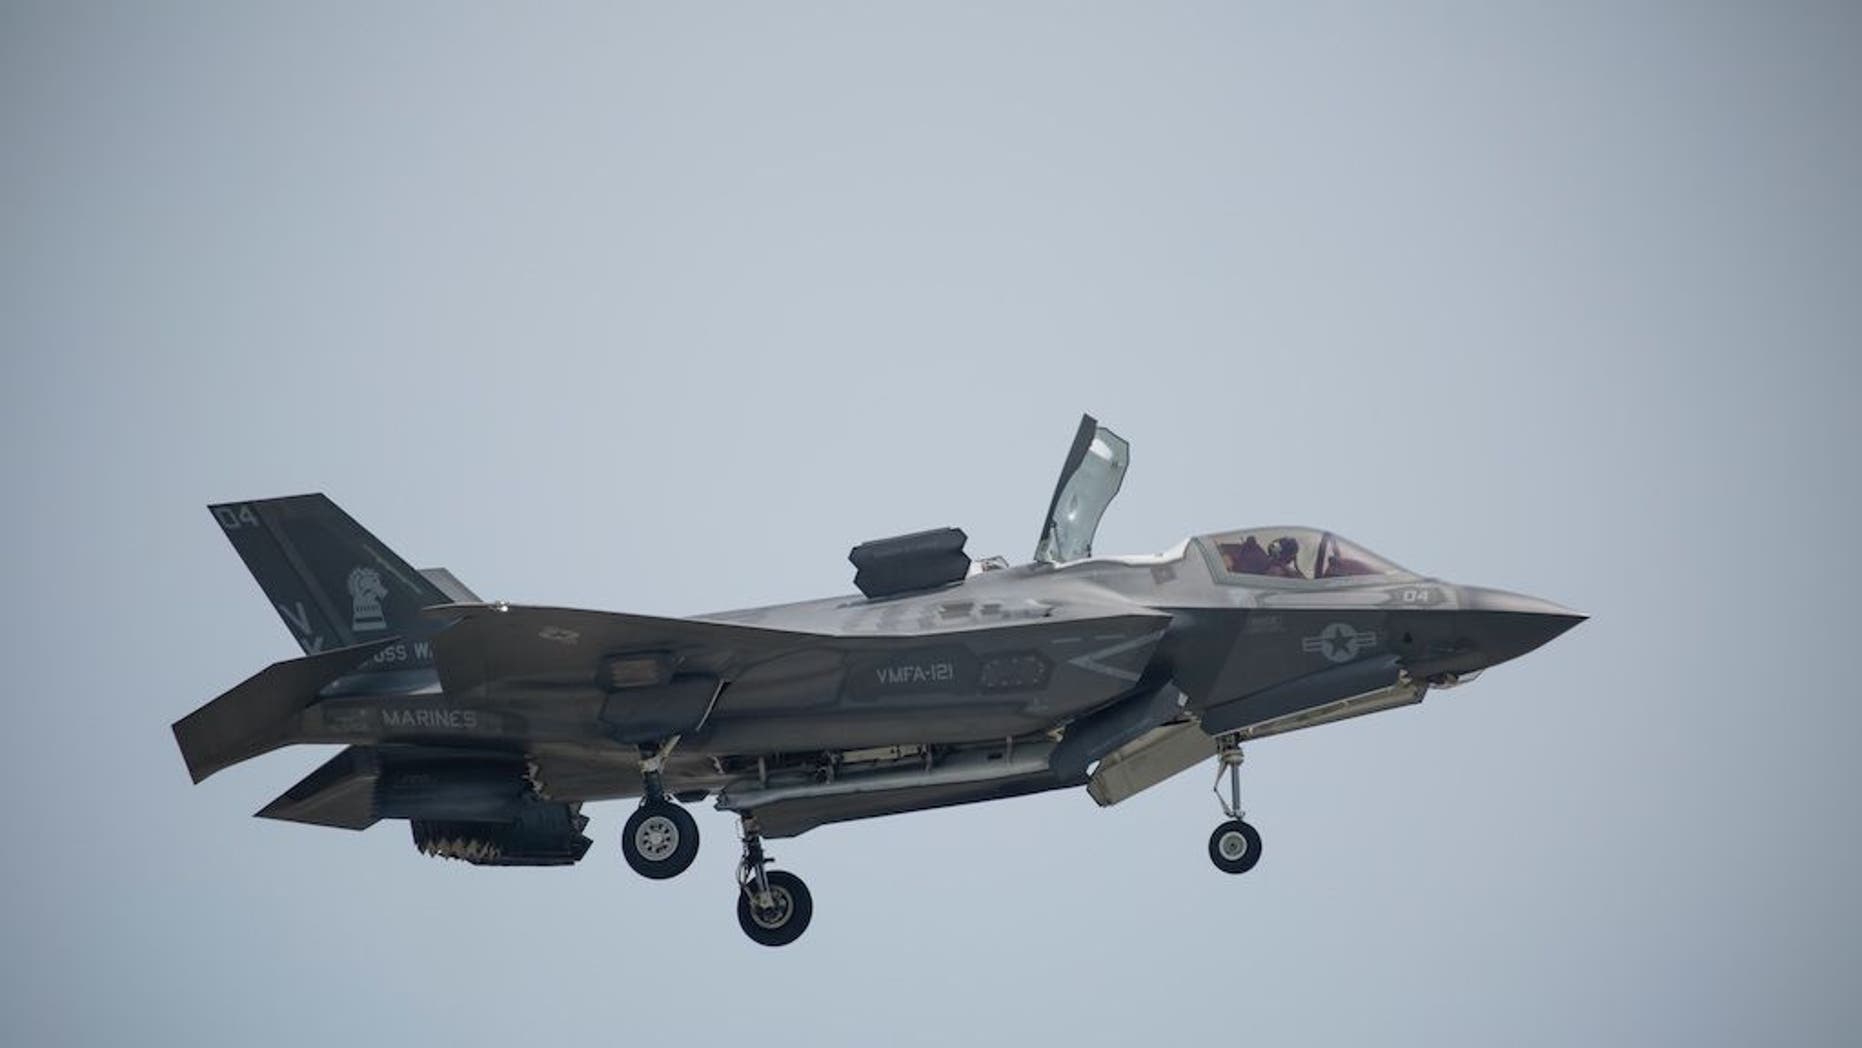 Some F-35s could become unflyable by 2026